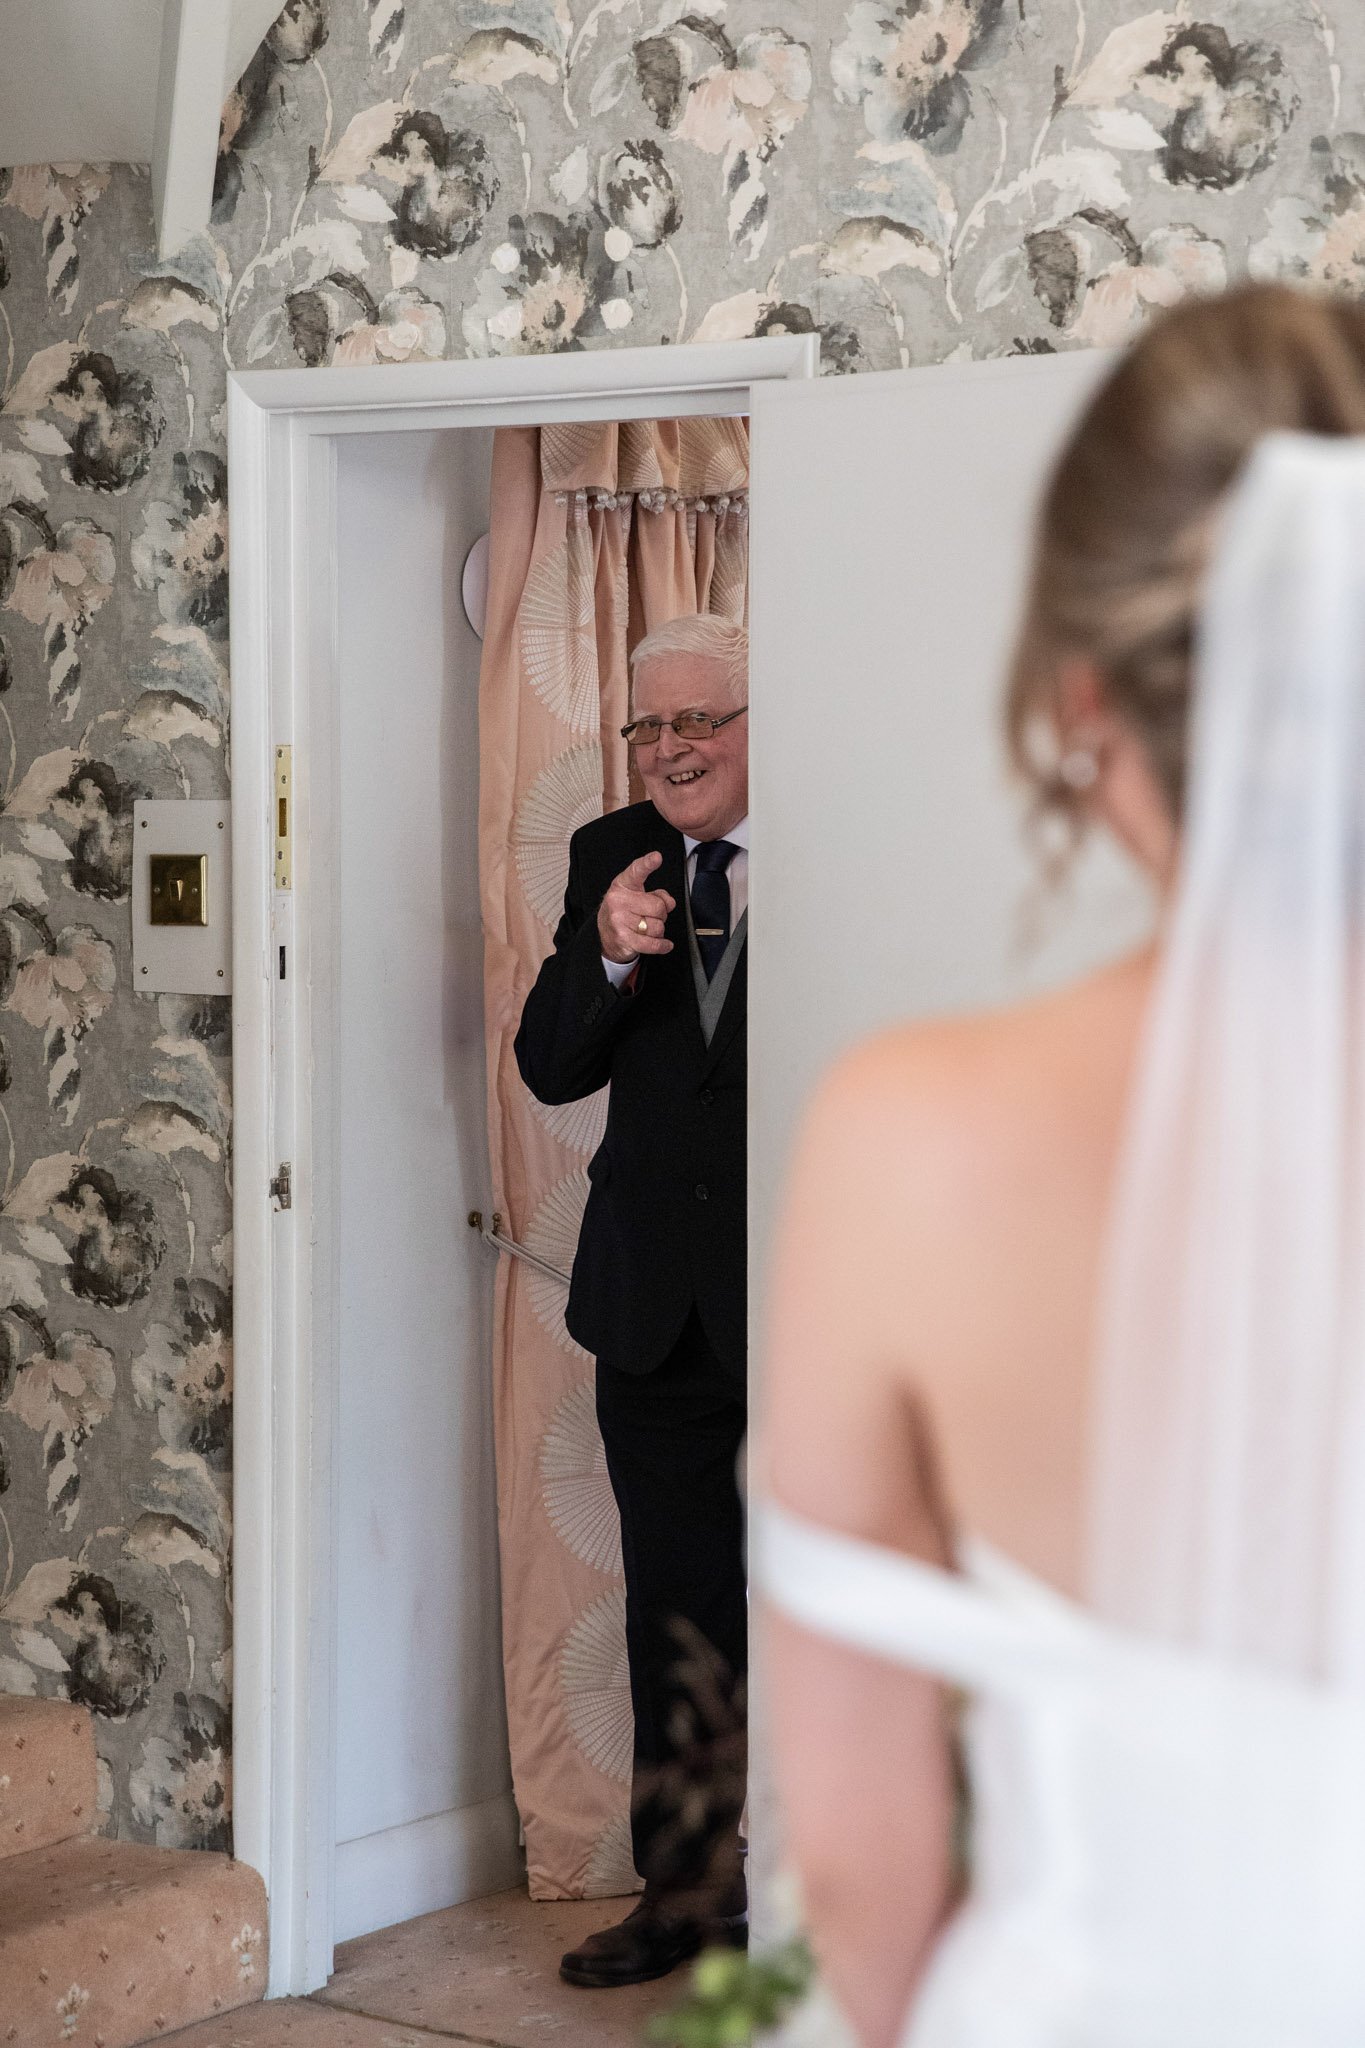 Father seeing bride for the first time, first look.